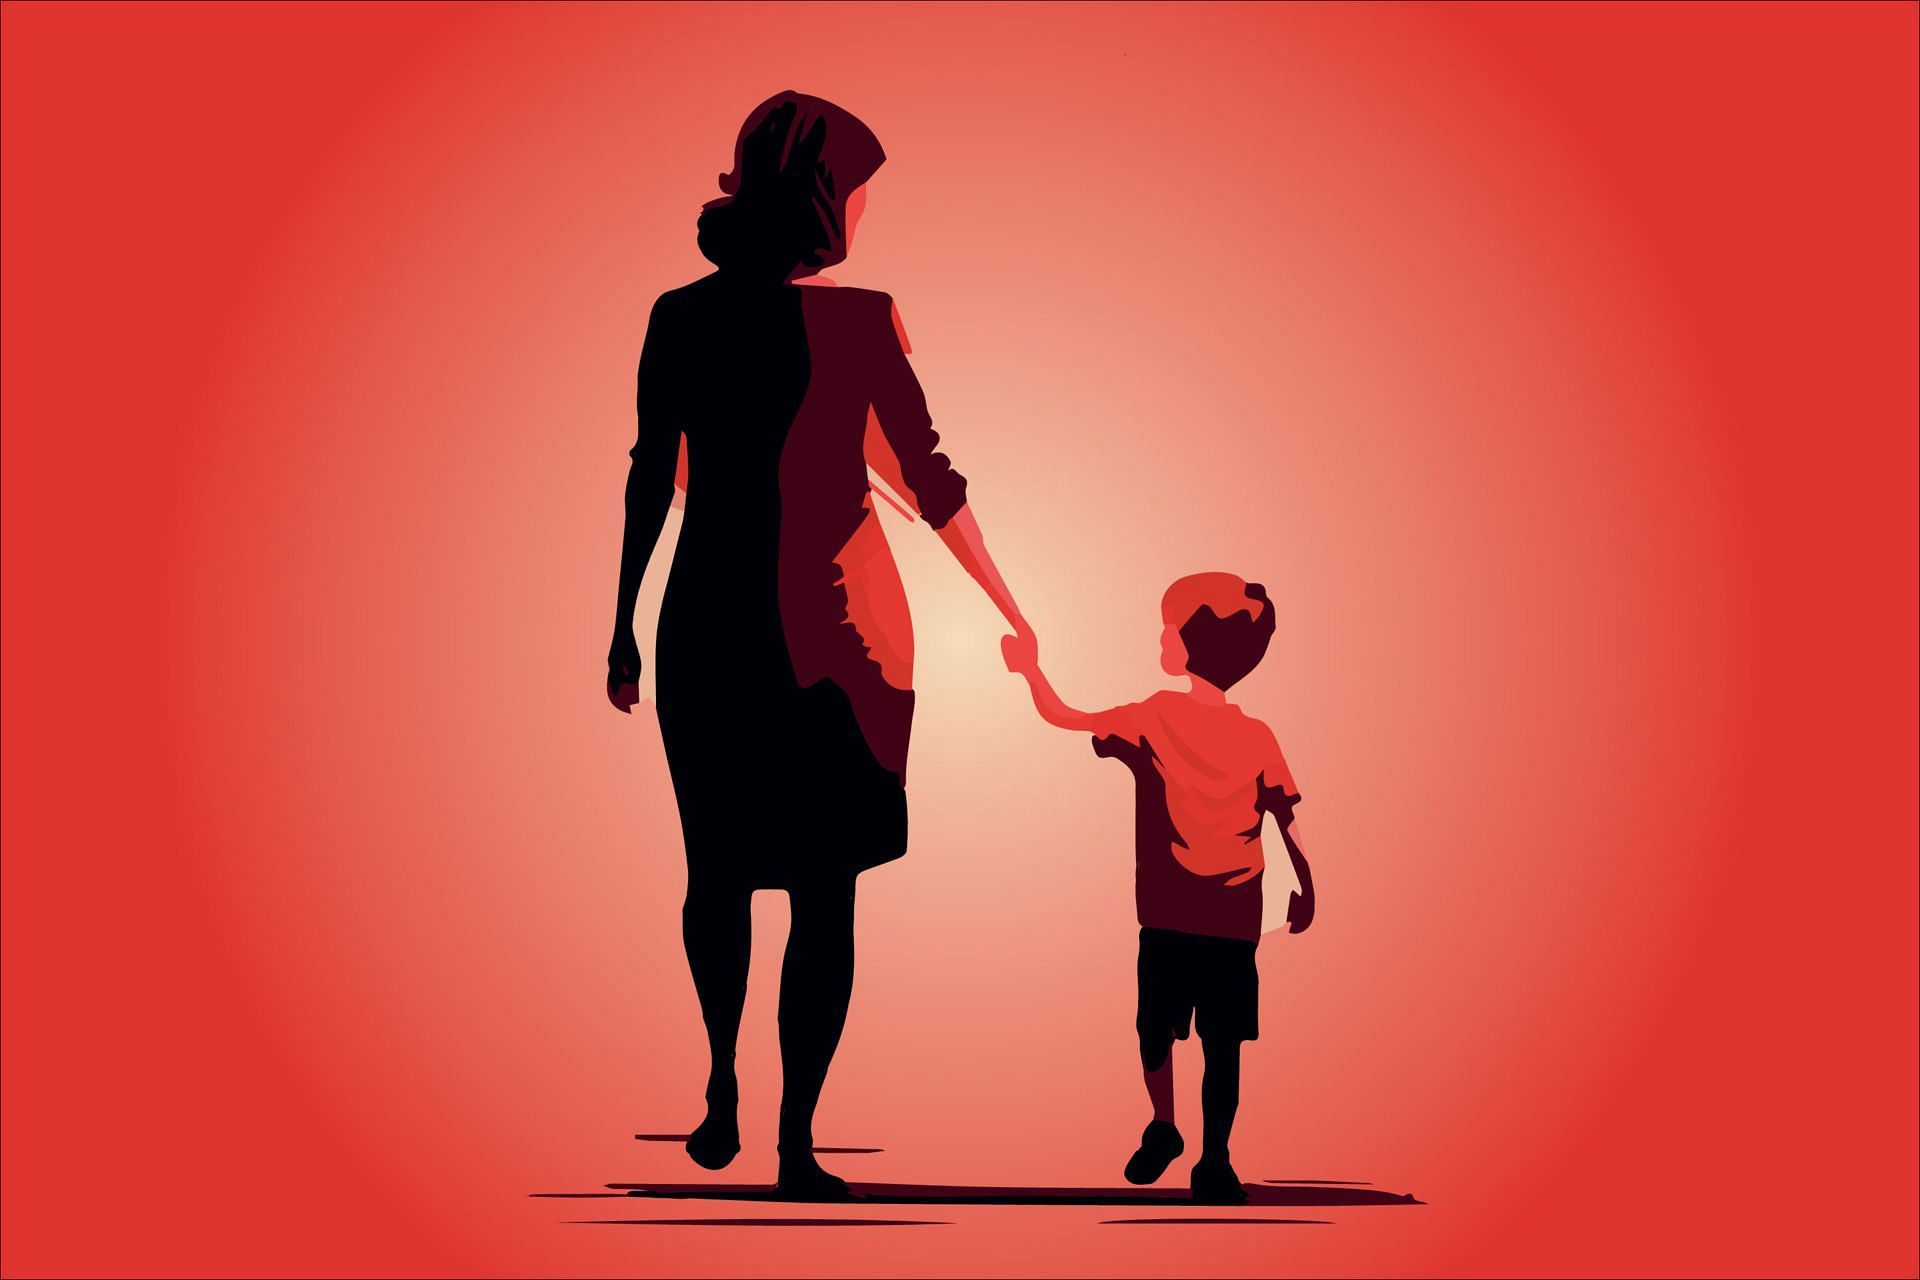 Does your parenting have a negative impact on you? (Image via Vecteezy/Fortis Design)